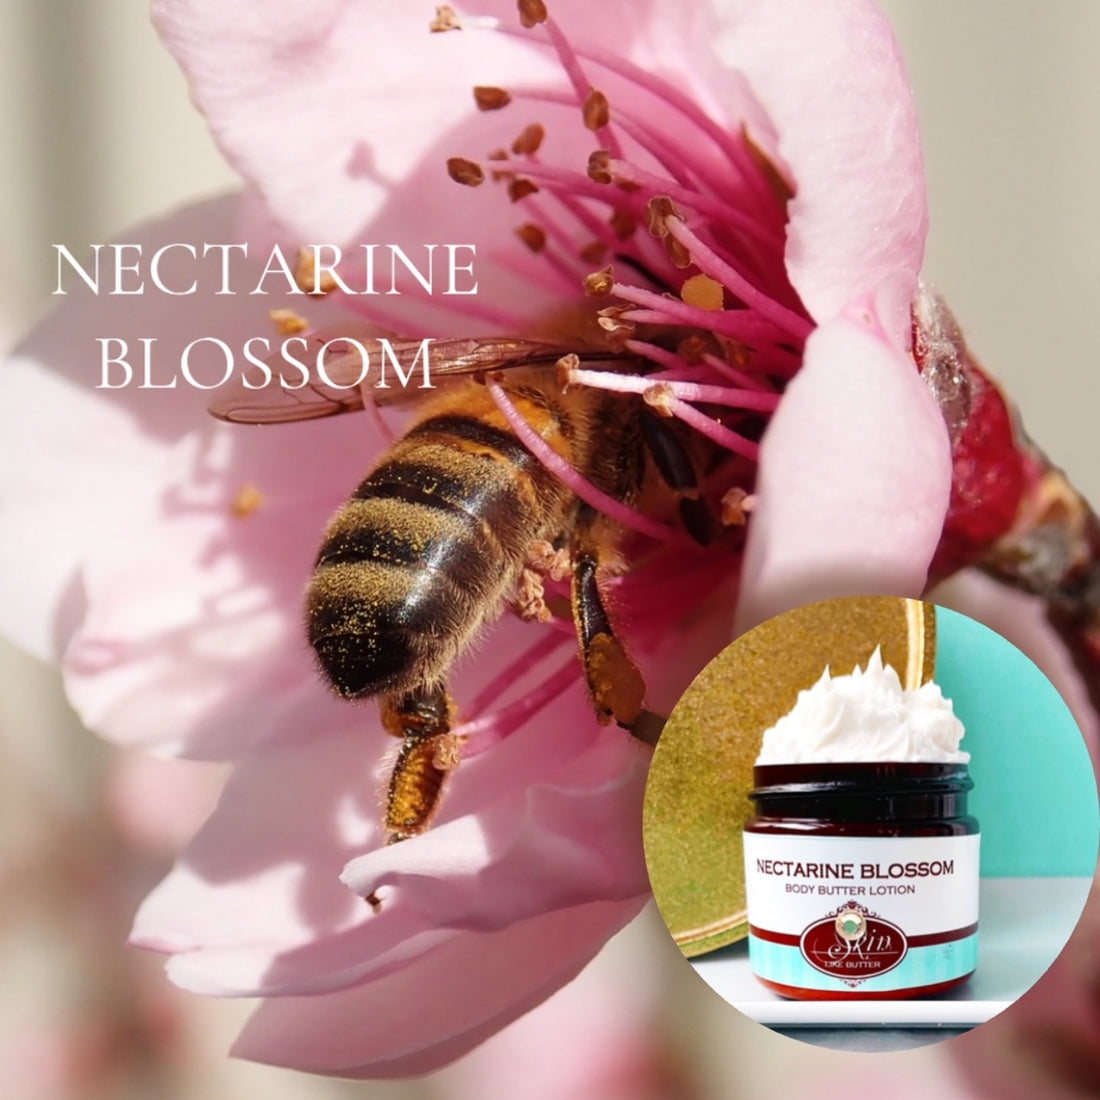 NECTARINE BLOSSOM scented water free, vegan non-greasy Body Butter Lotion